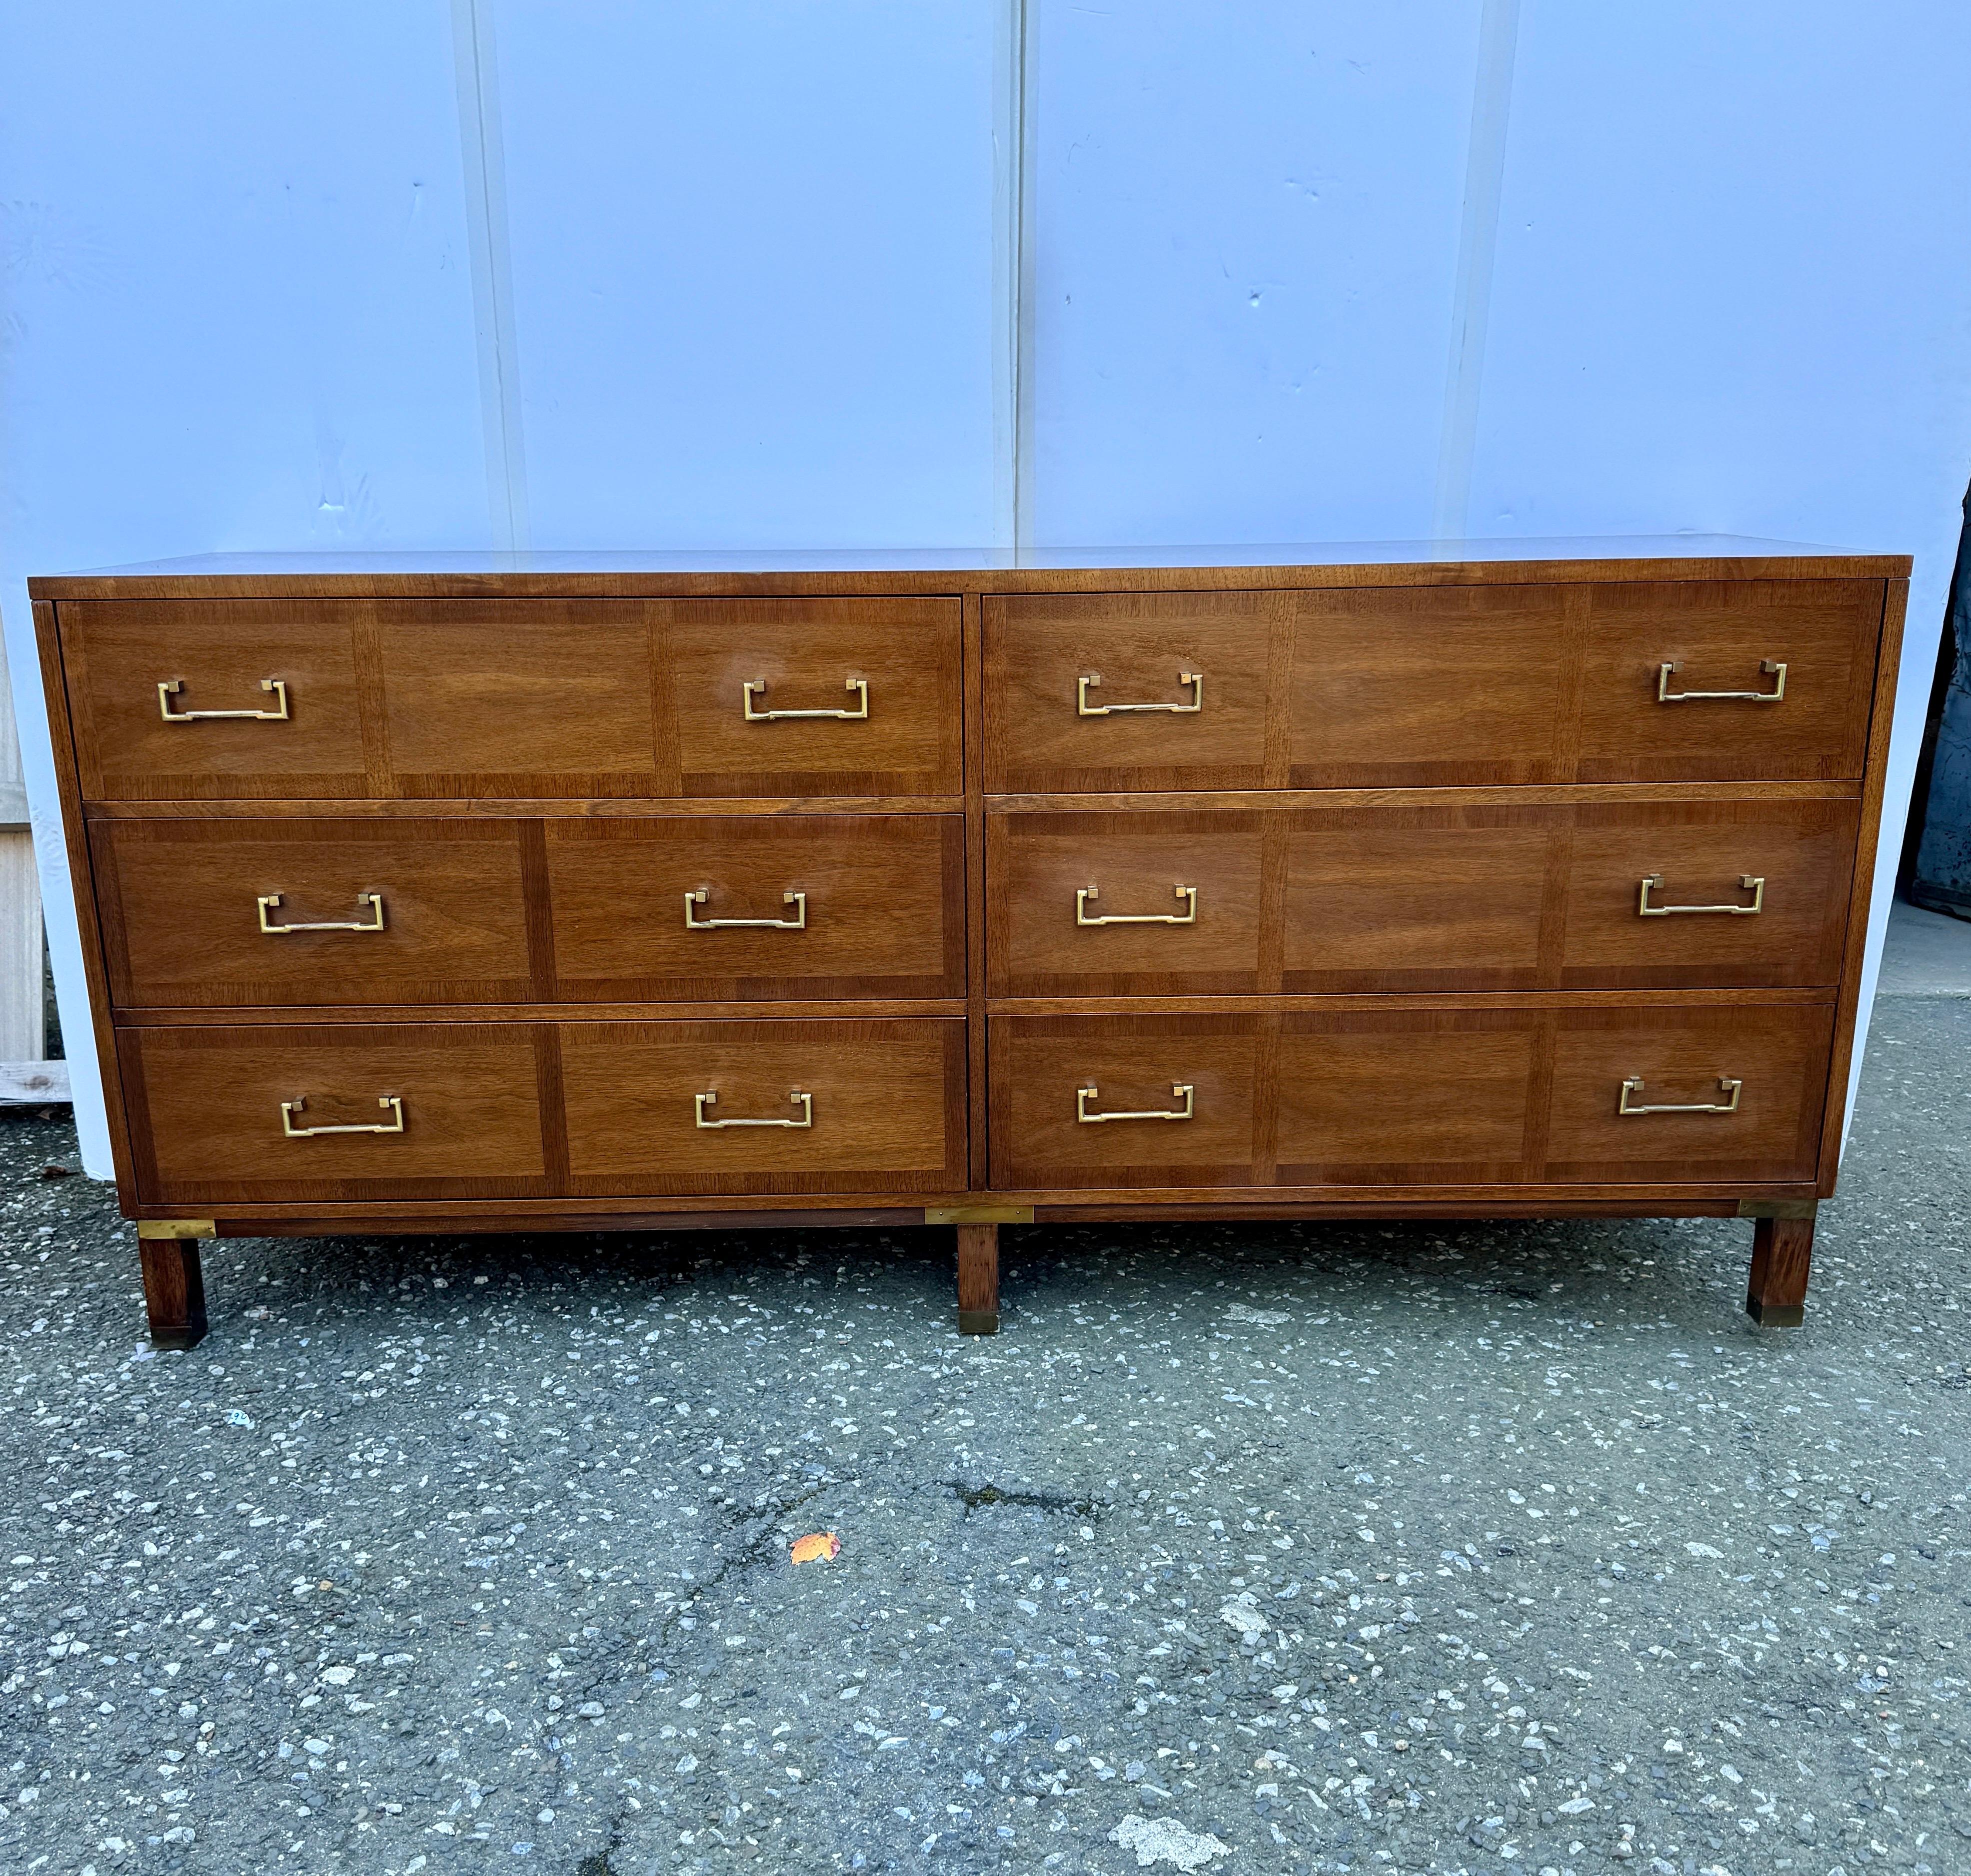 Sligh Furniture Six Drawer Mid Century Modern Chest by Sligh Furniture

Experience the timeless sophistication of the Campaign Style six dresser by Sligh Furniture Co., crafted circa 1950s. This vintage walnut with solid brass hardware and accents,